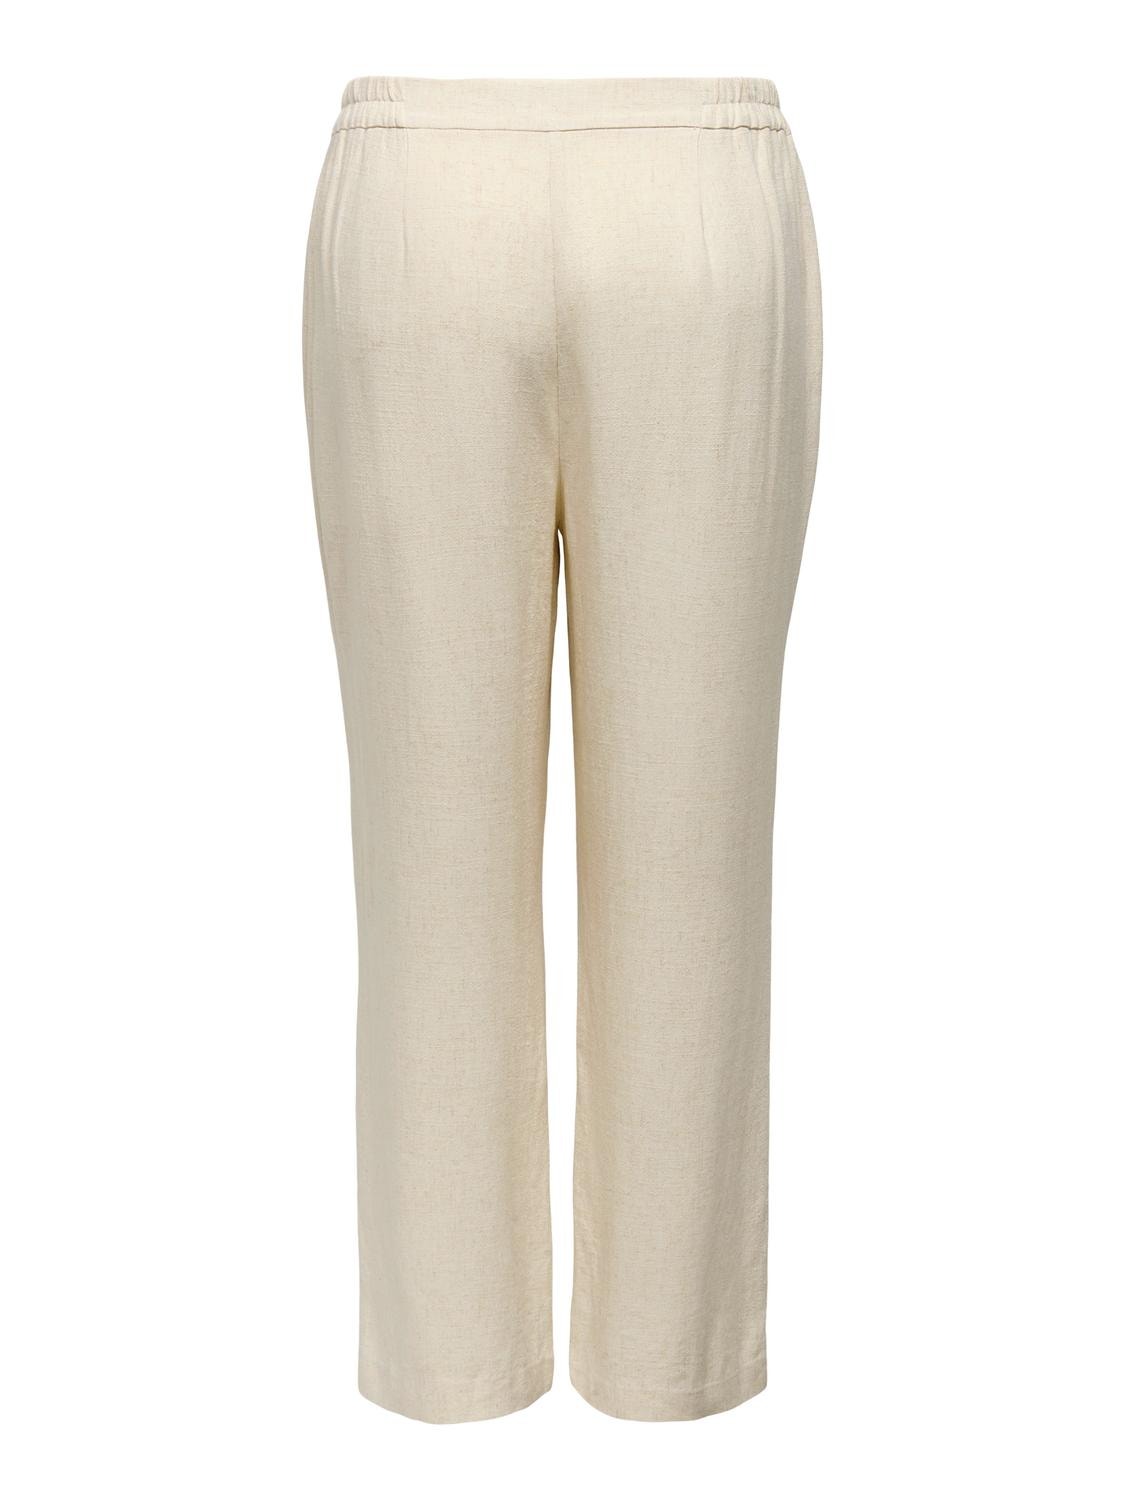 ONLY Curvy trousers with mid waist -Moonbeam - 15319370